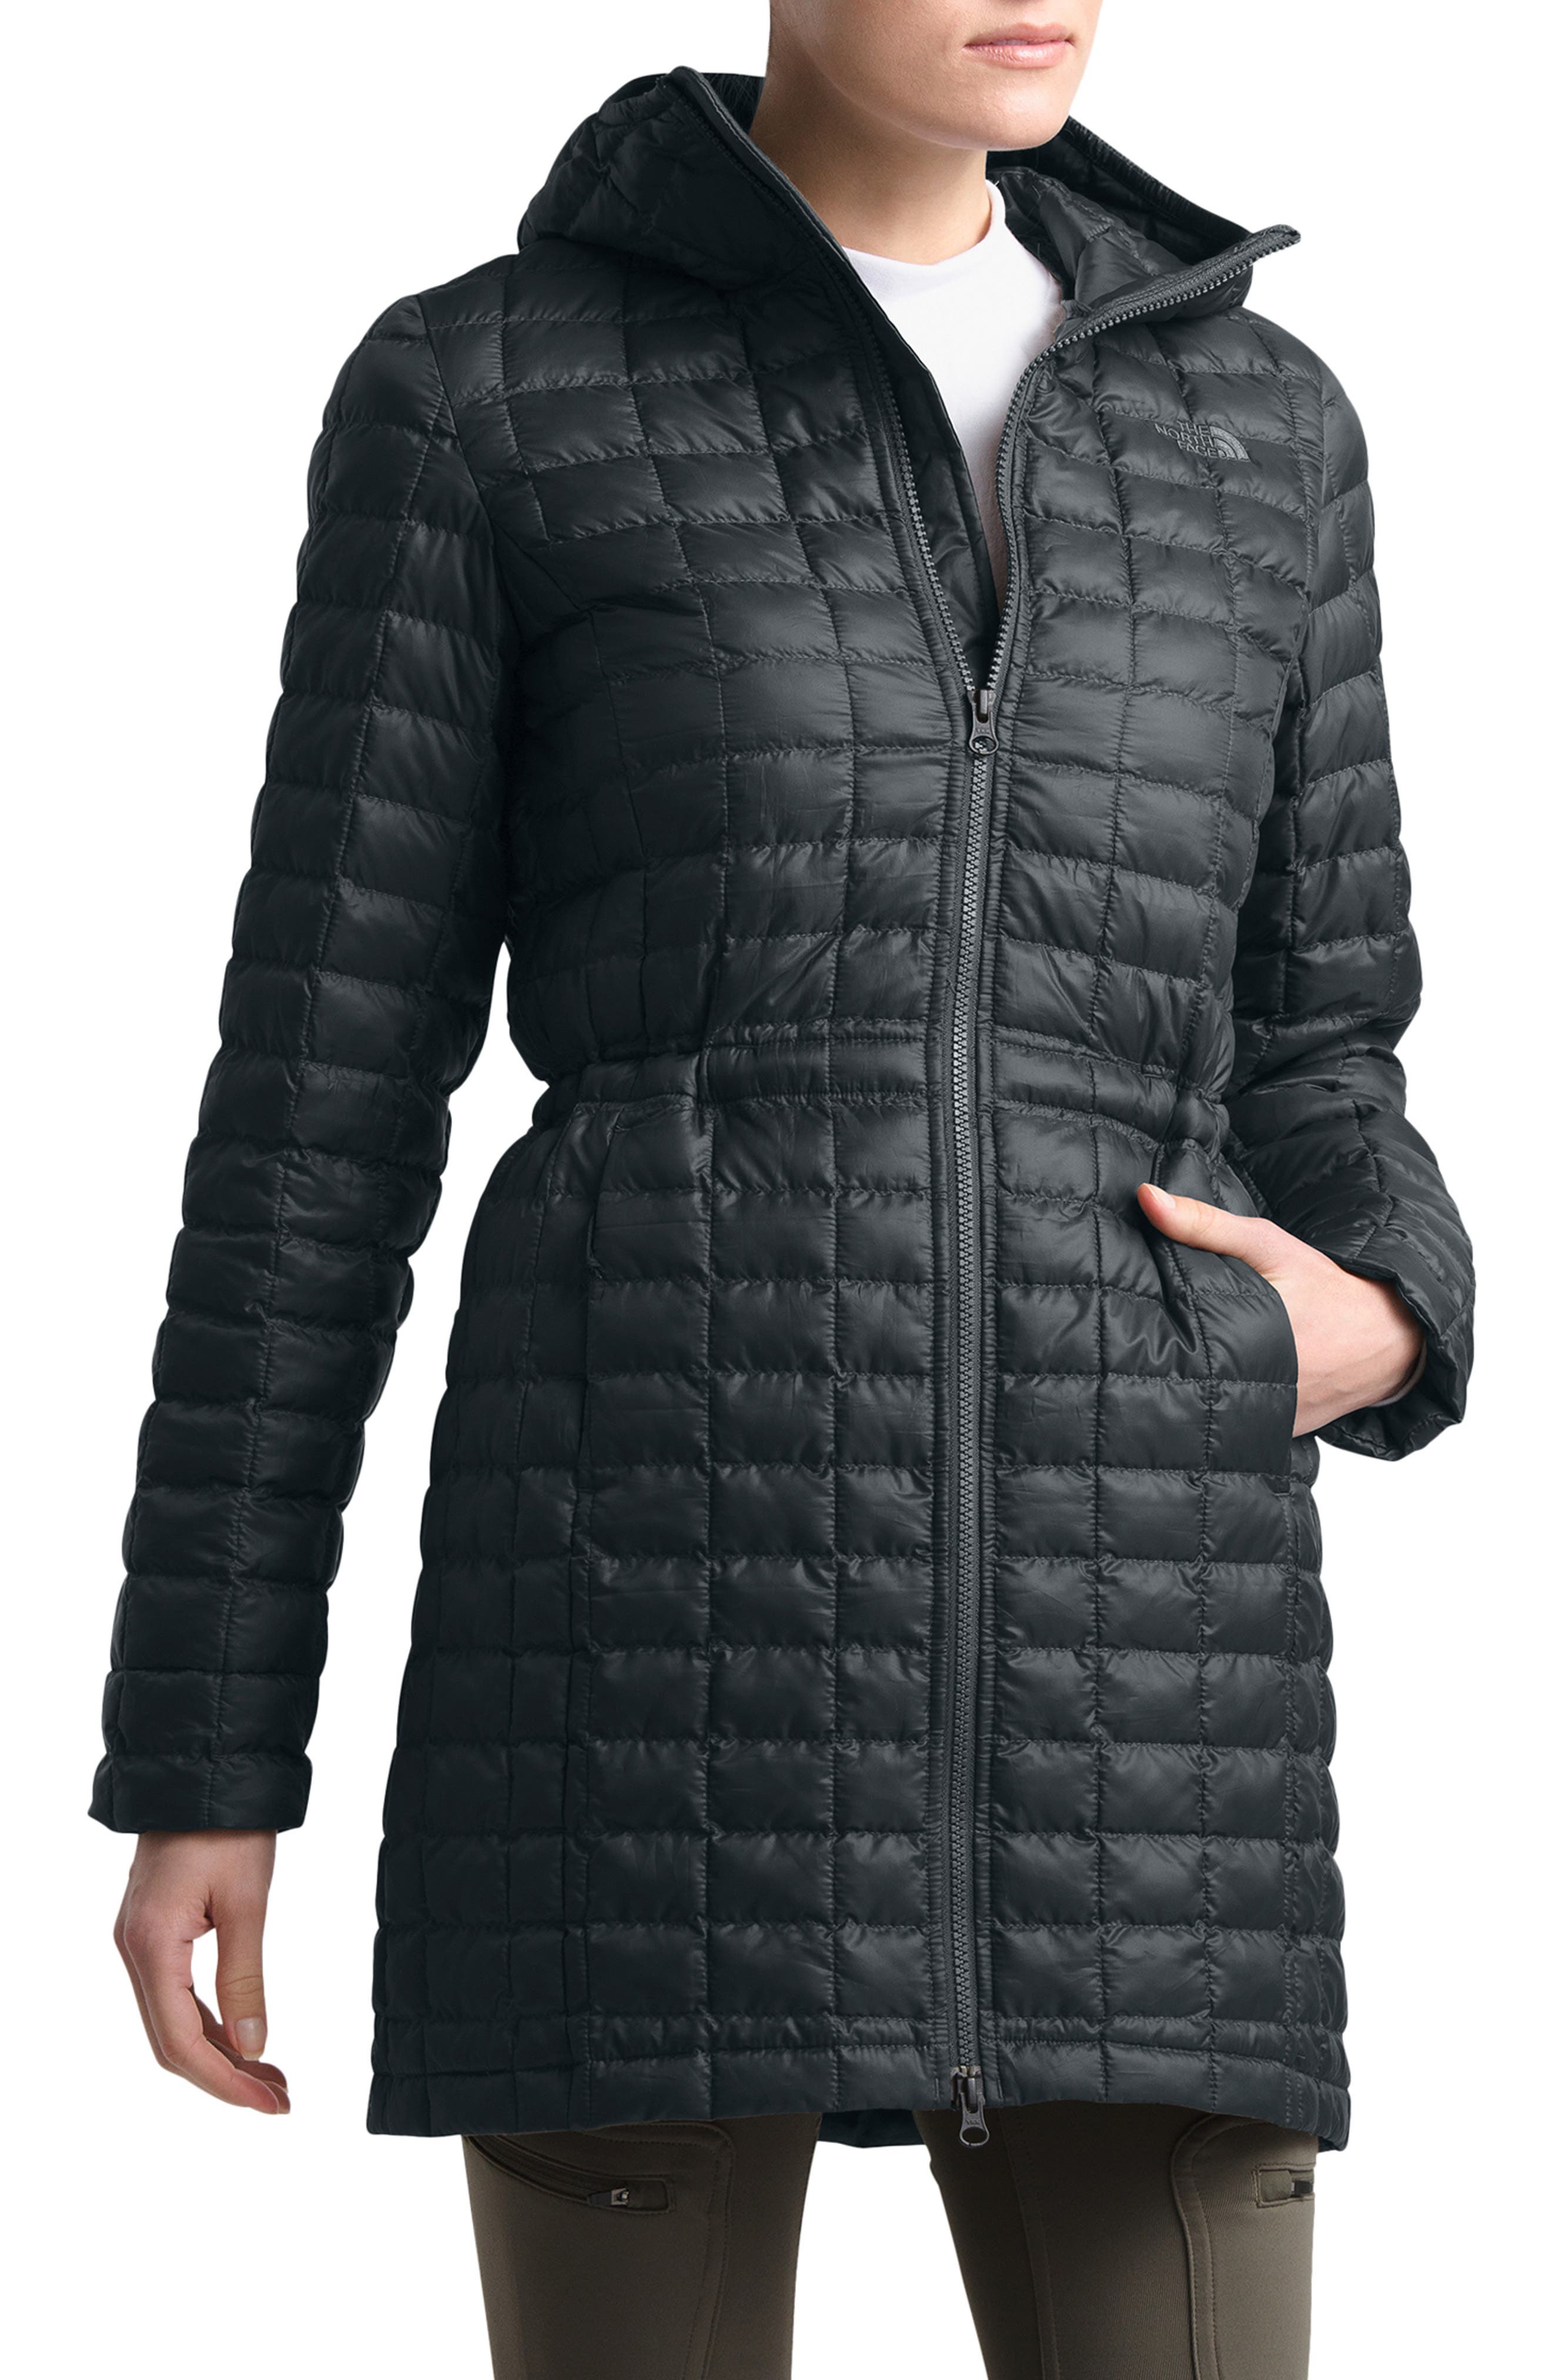 north face women's jackets on clearance